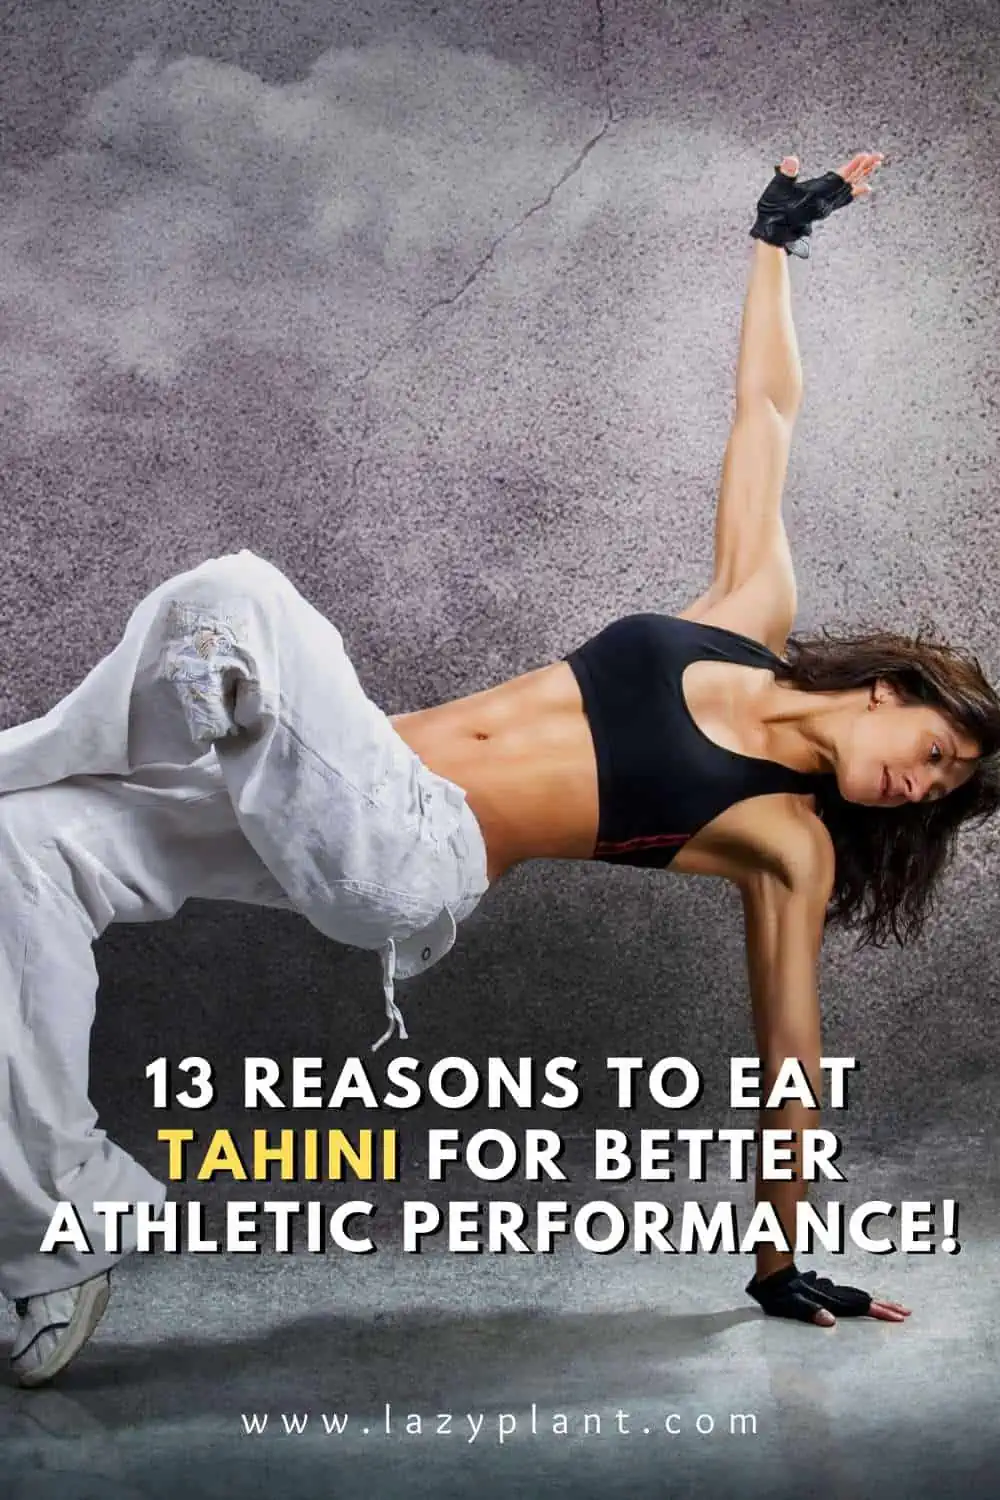 athletes should eat tahini before or after exercise!